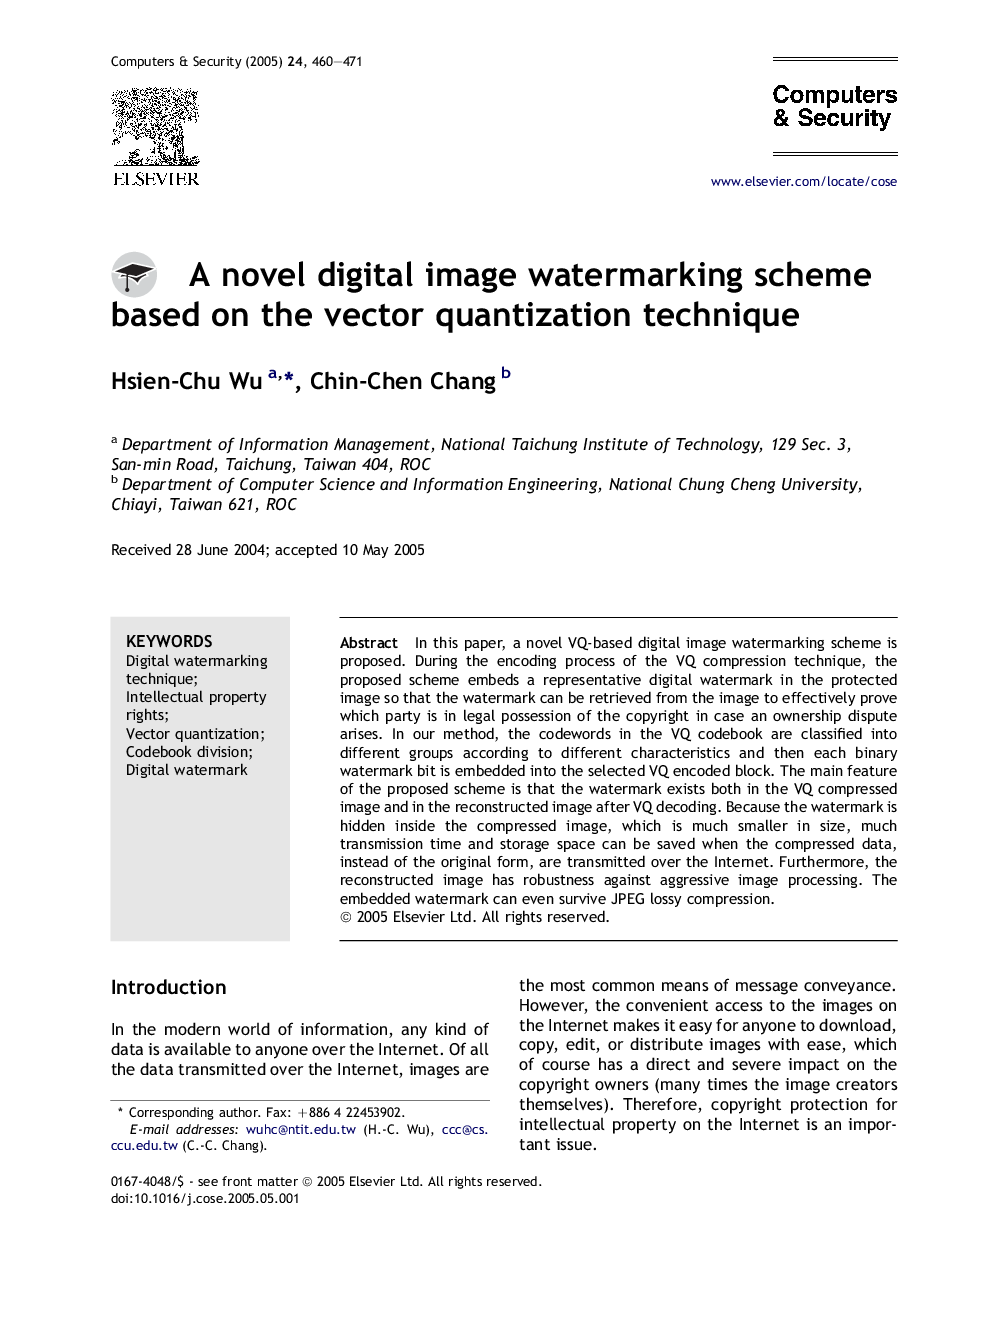 A novel digital image watermarking scheme based on the vector quantization technique